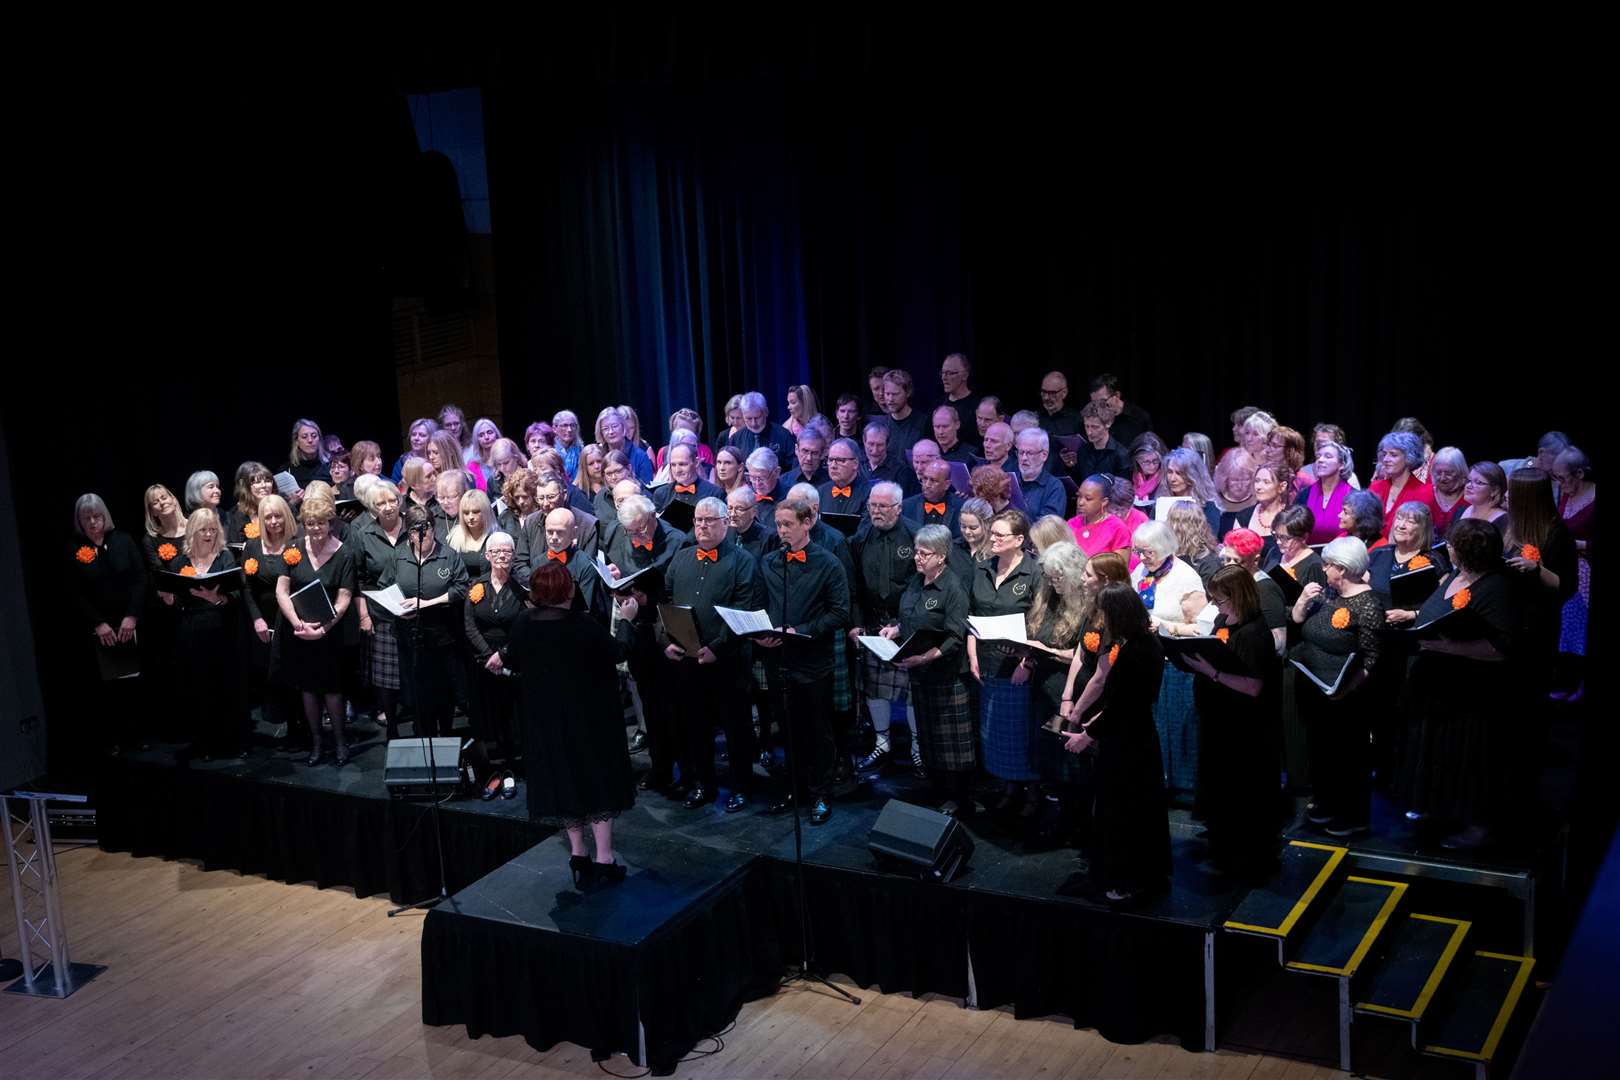 The finale saw all choir take on stage together for a powerful rendition of Caledonia by Dougie MacLean. Picture: Callum Mackay.